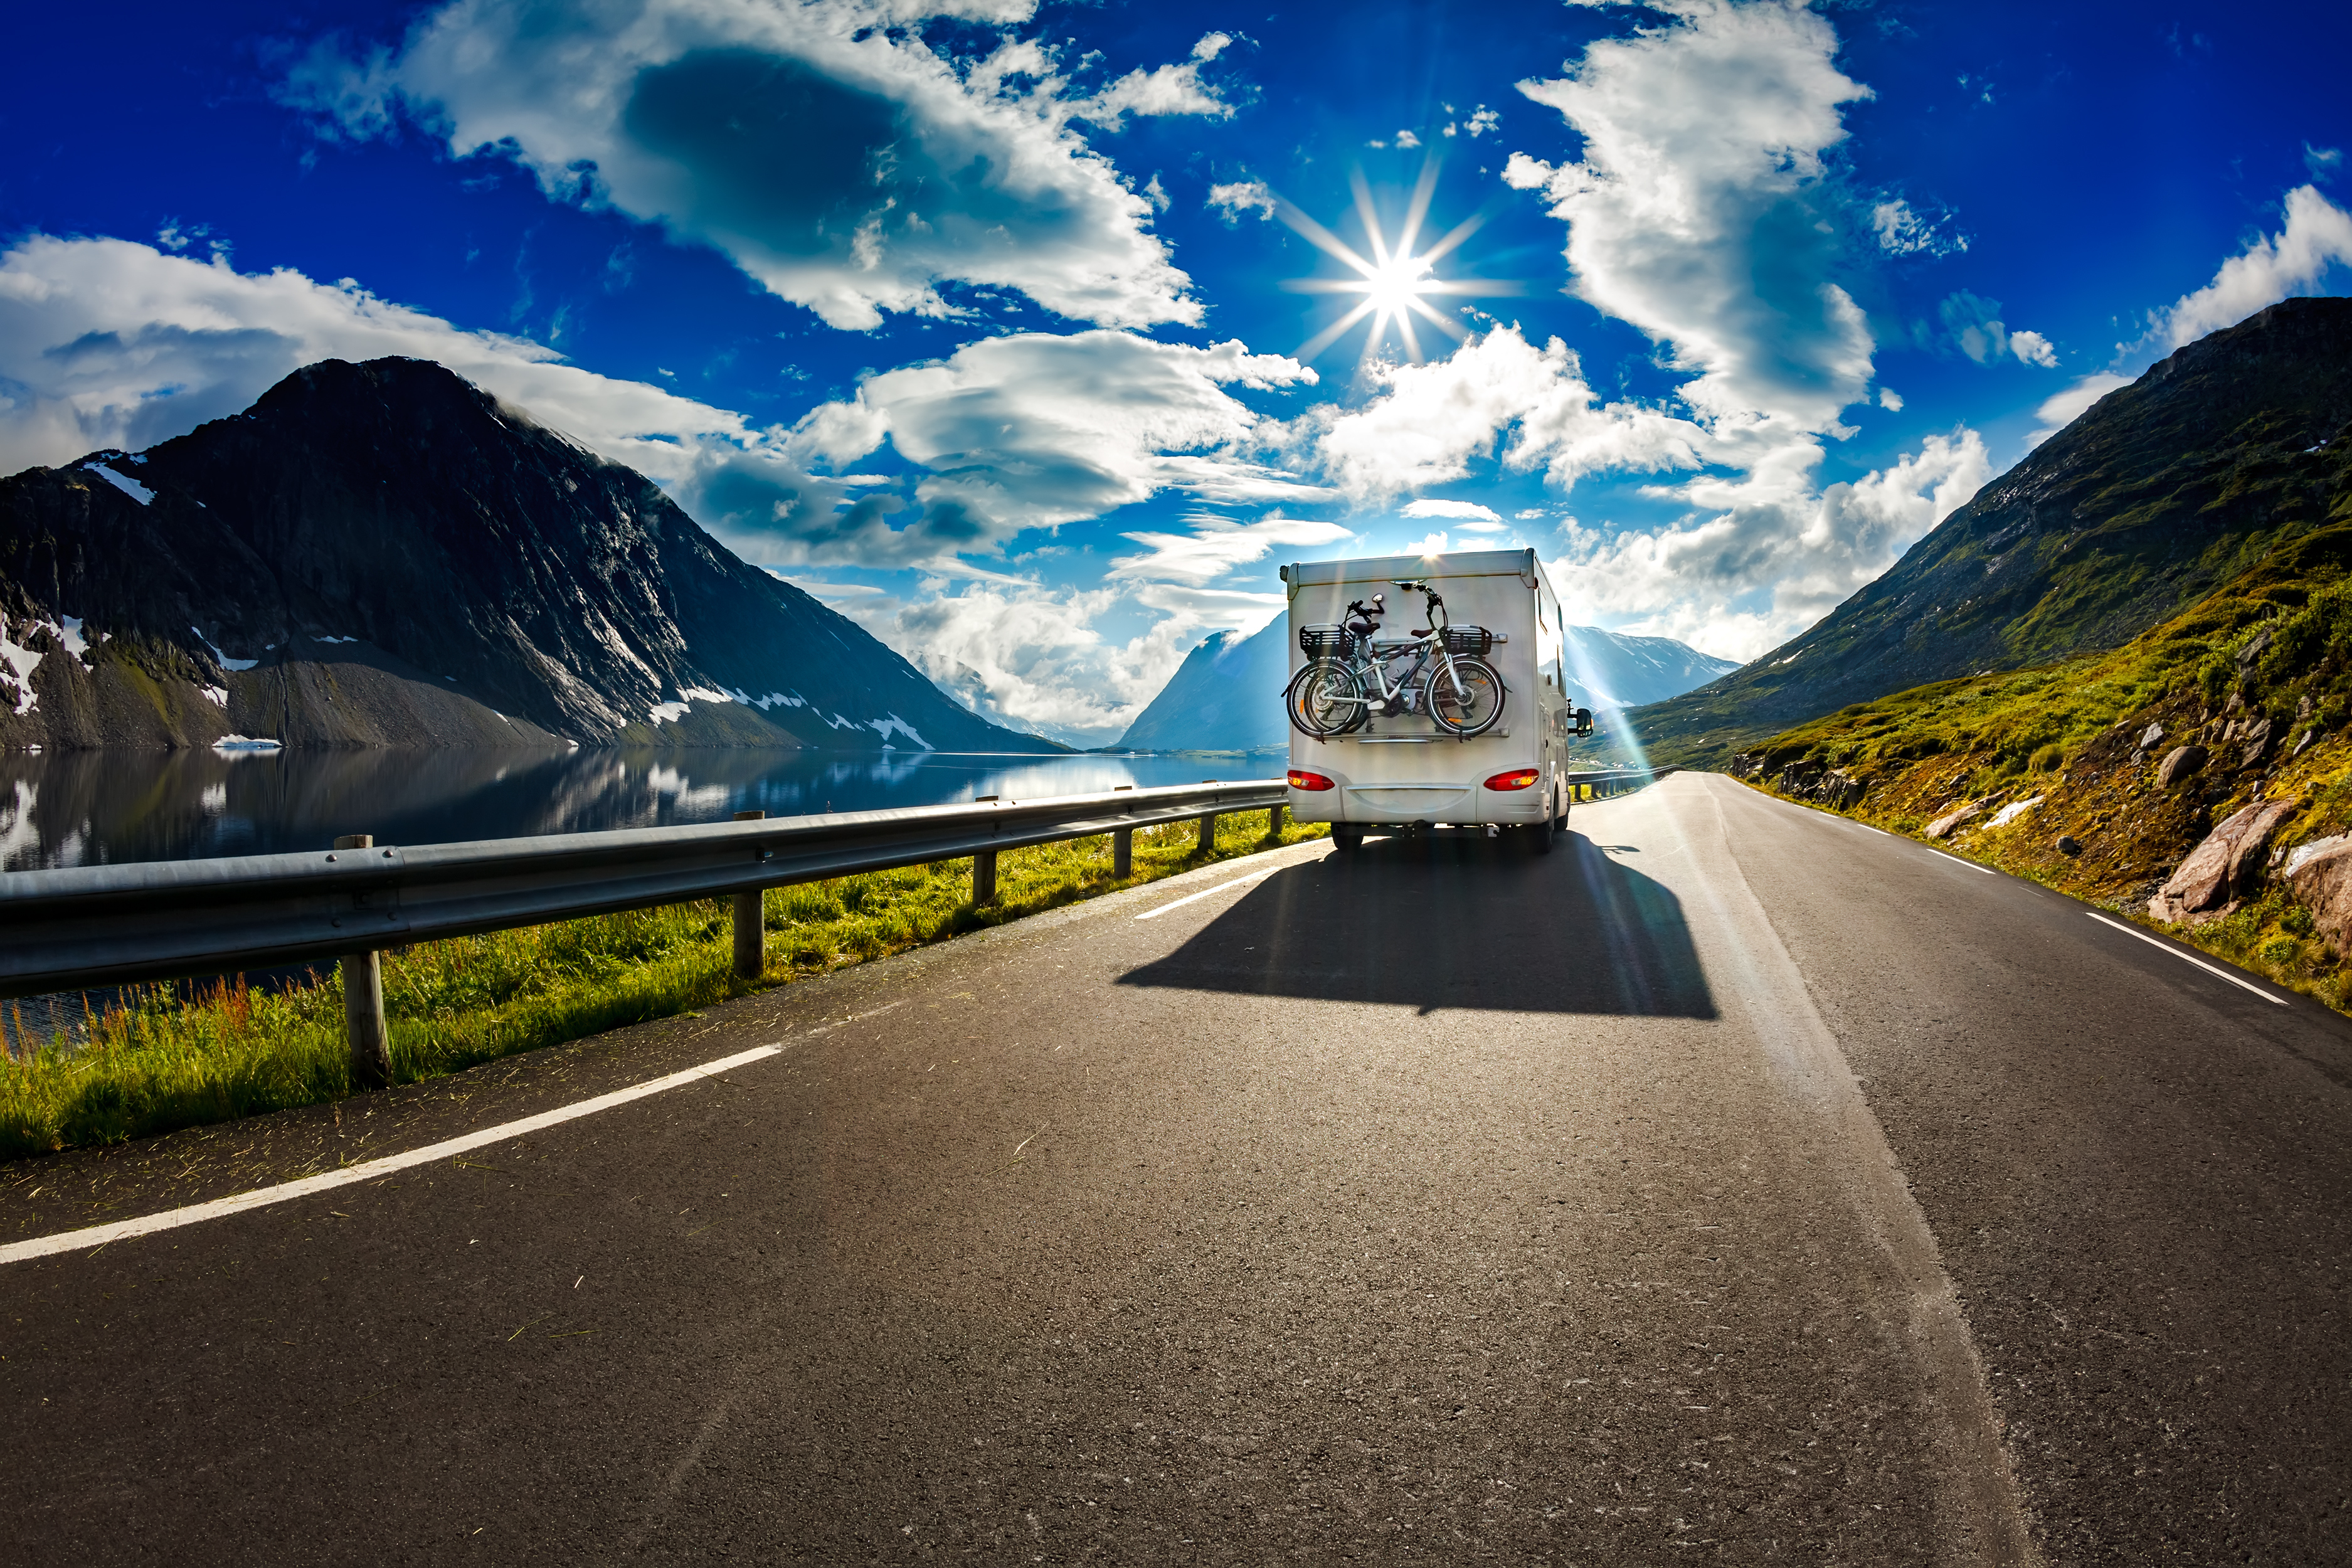 RV with bicycles on back driving down a road winding between two mountains on a sunny day with scattered clouds.